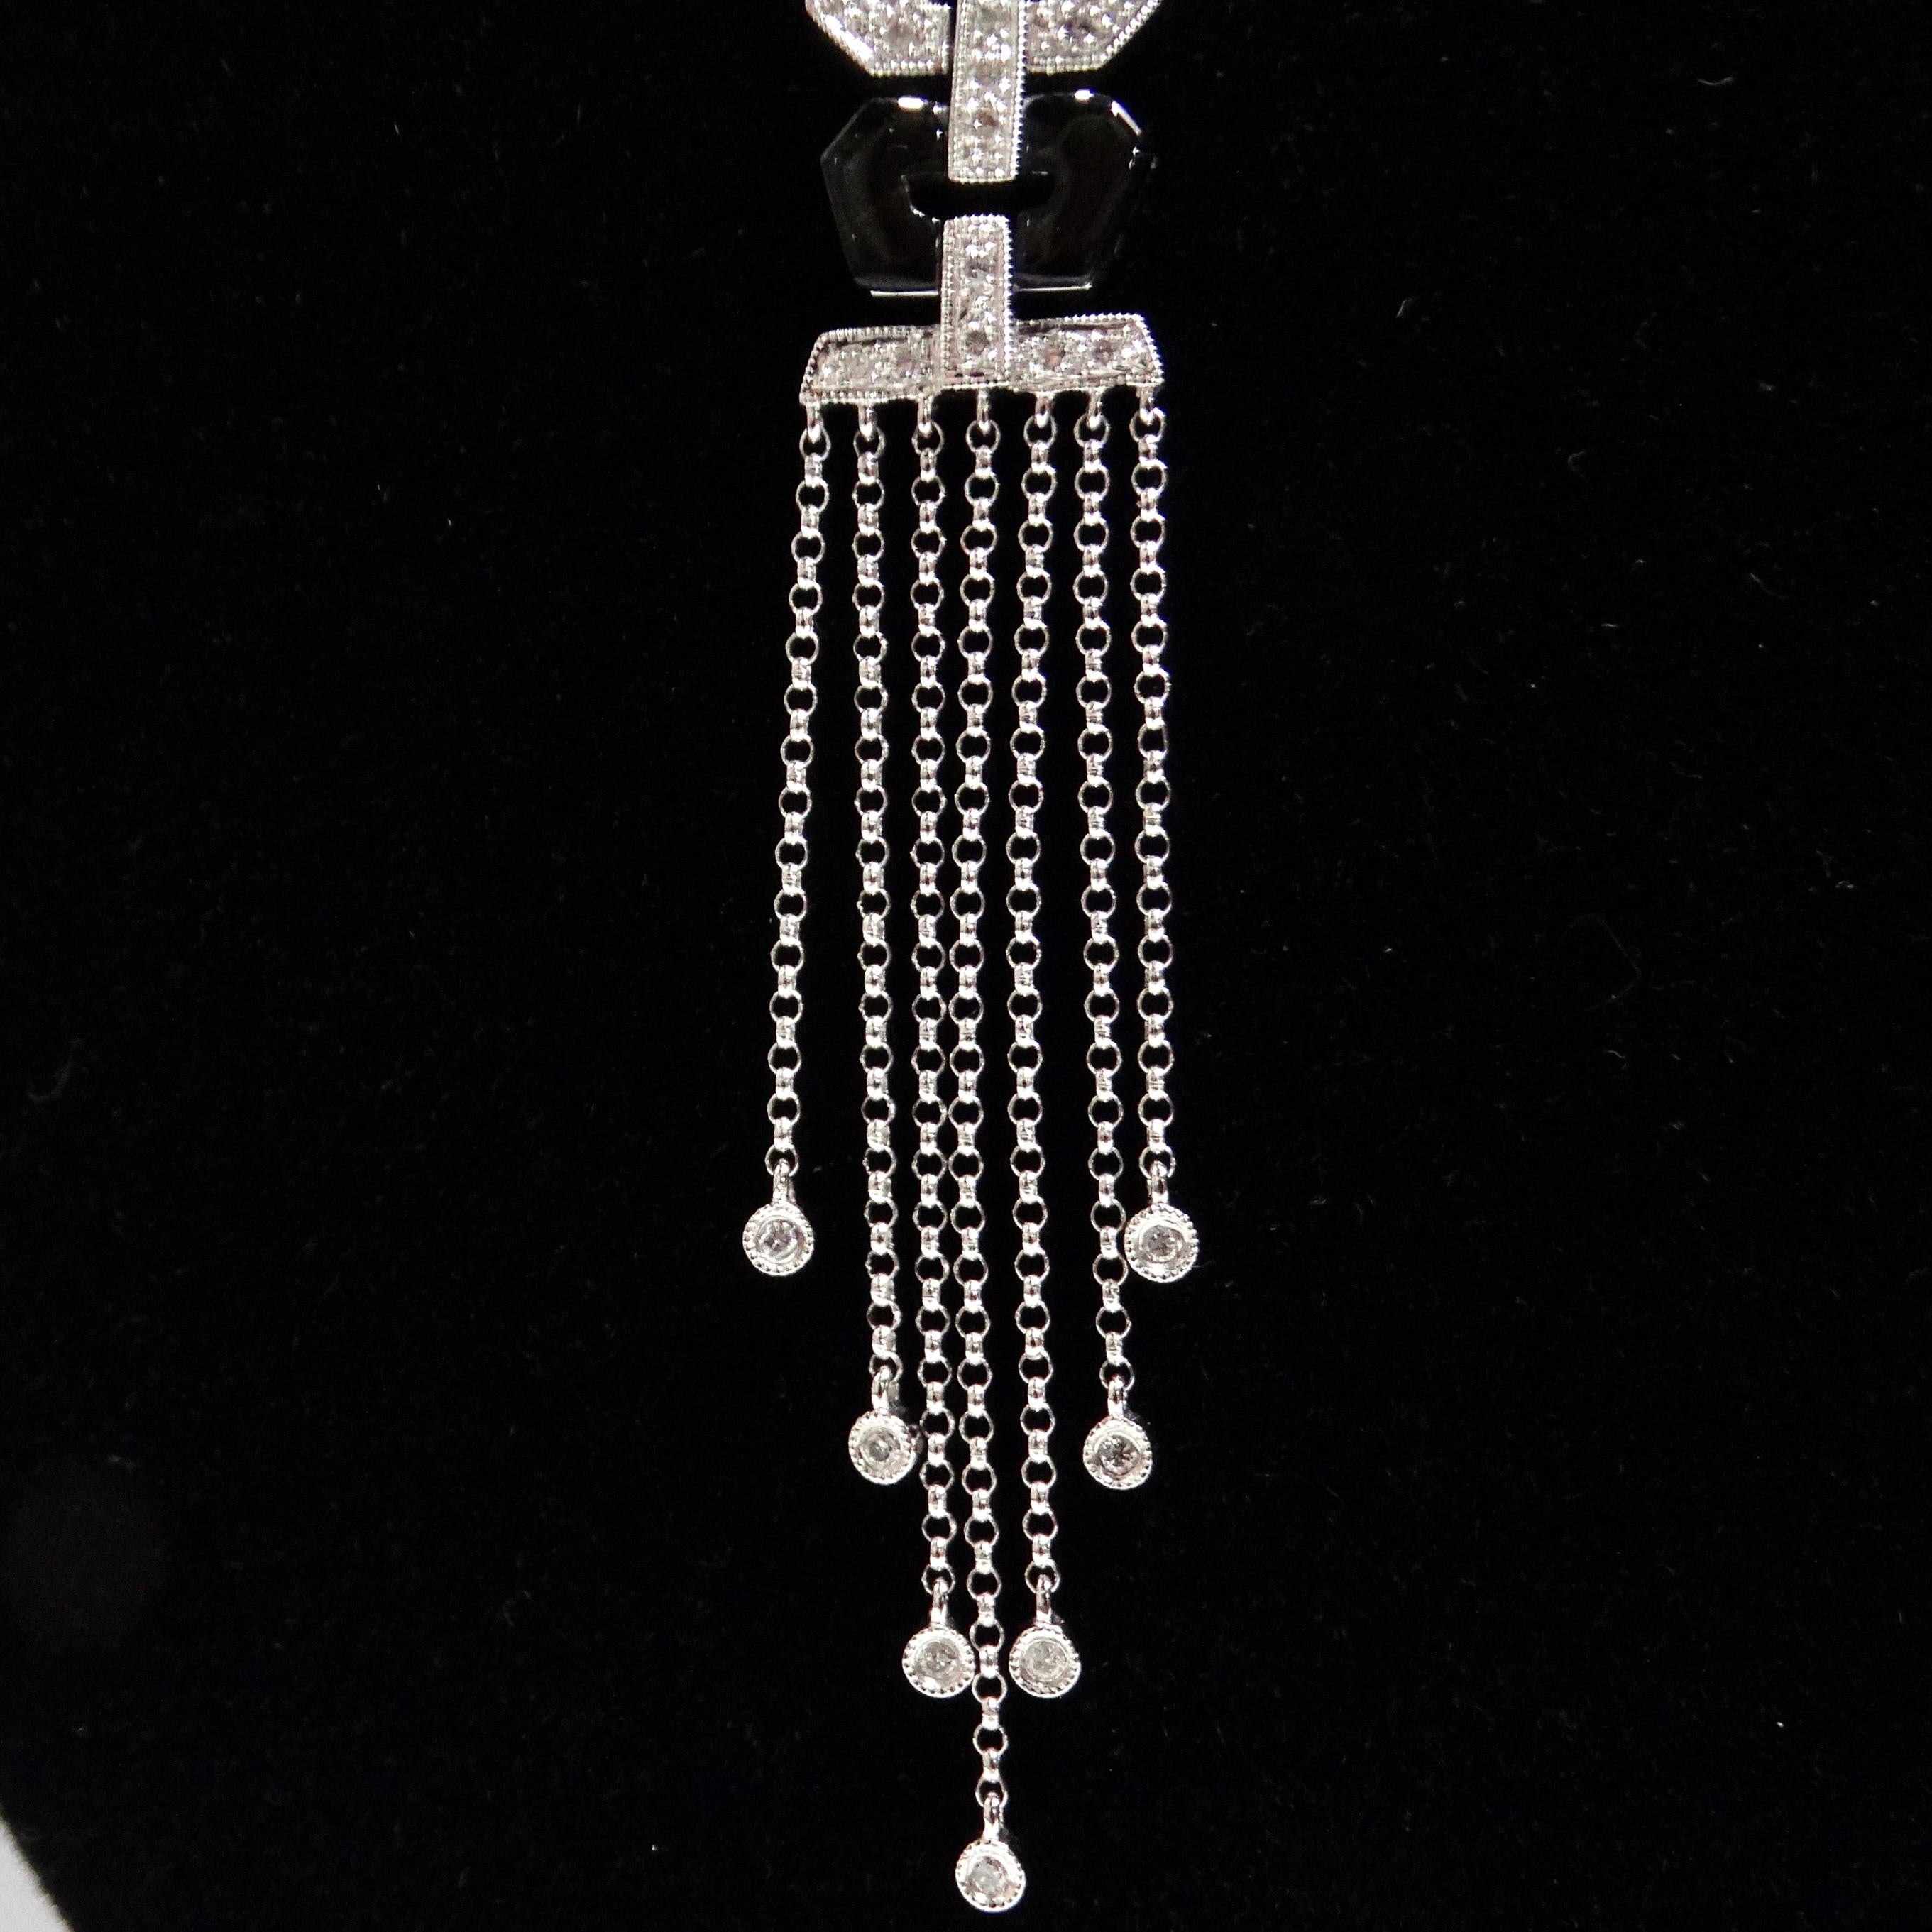 14K White Gold Diamond, Ruby, and Onyx Necklace In Excellent Condition For Sale In Scottsdale, AZ